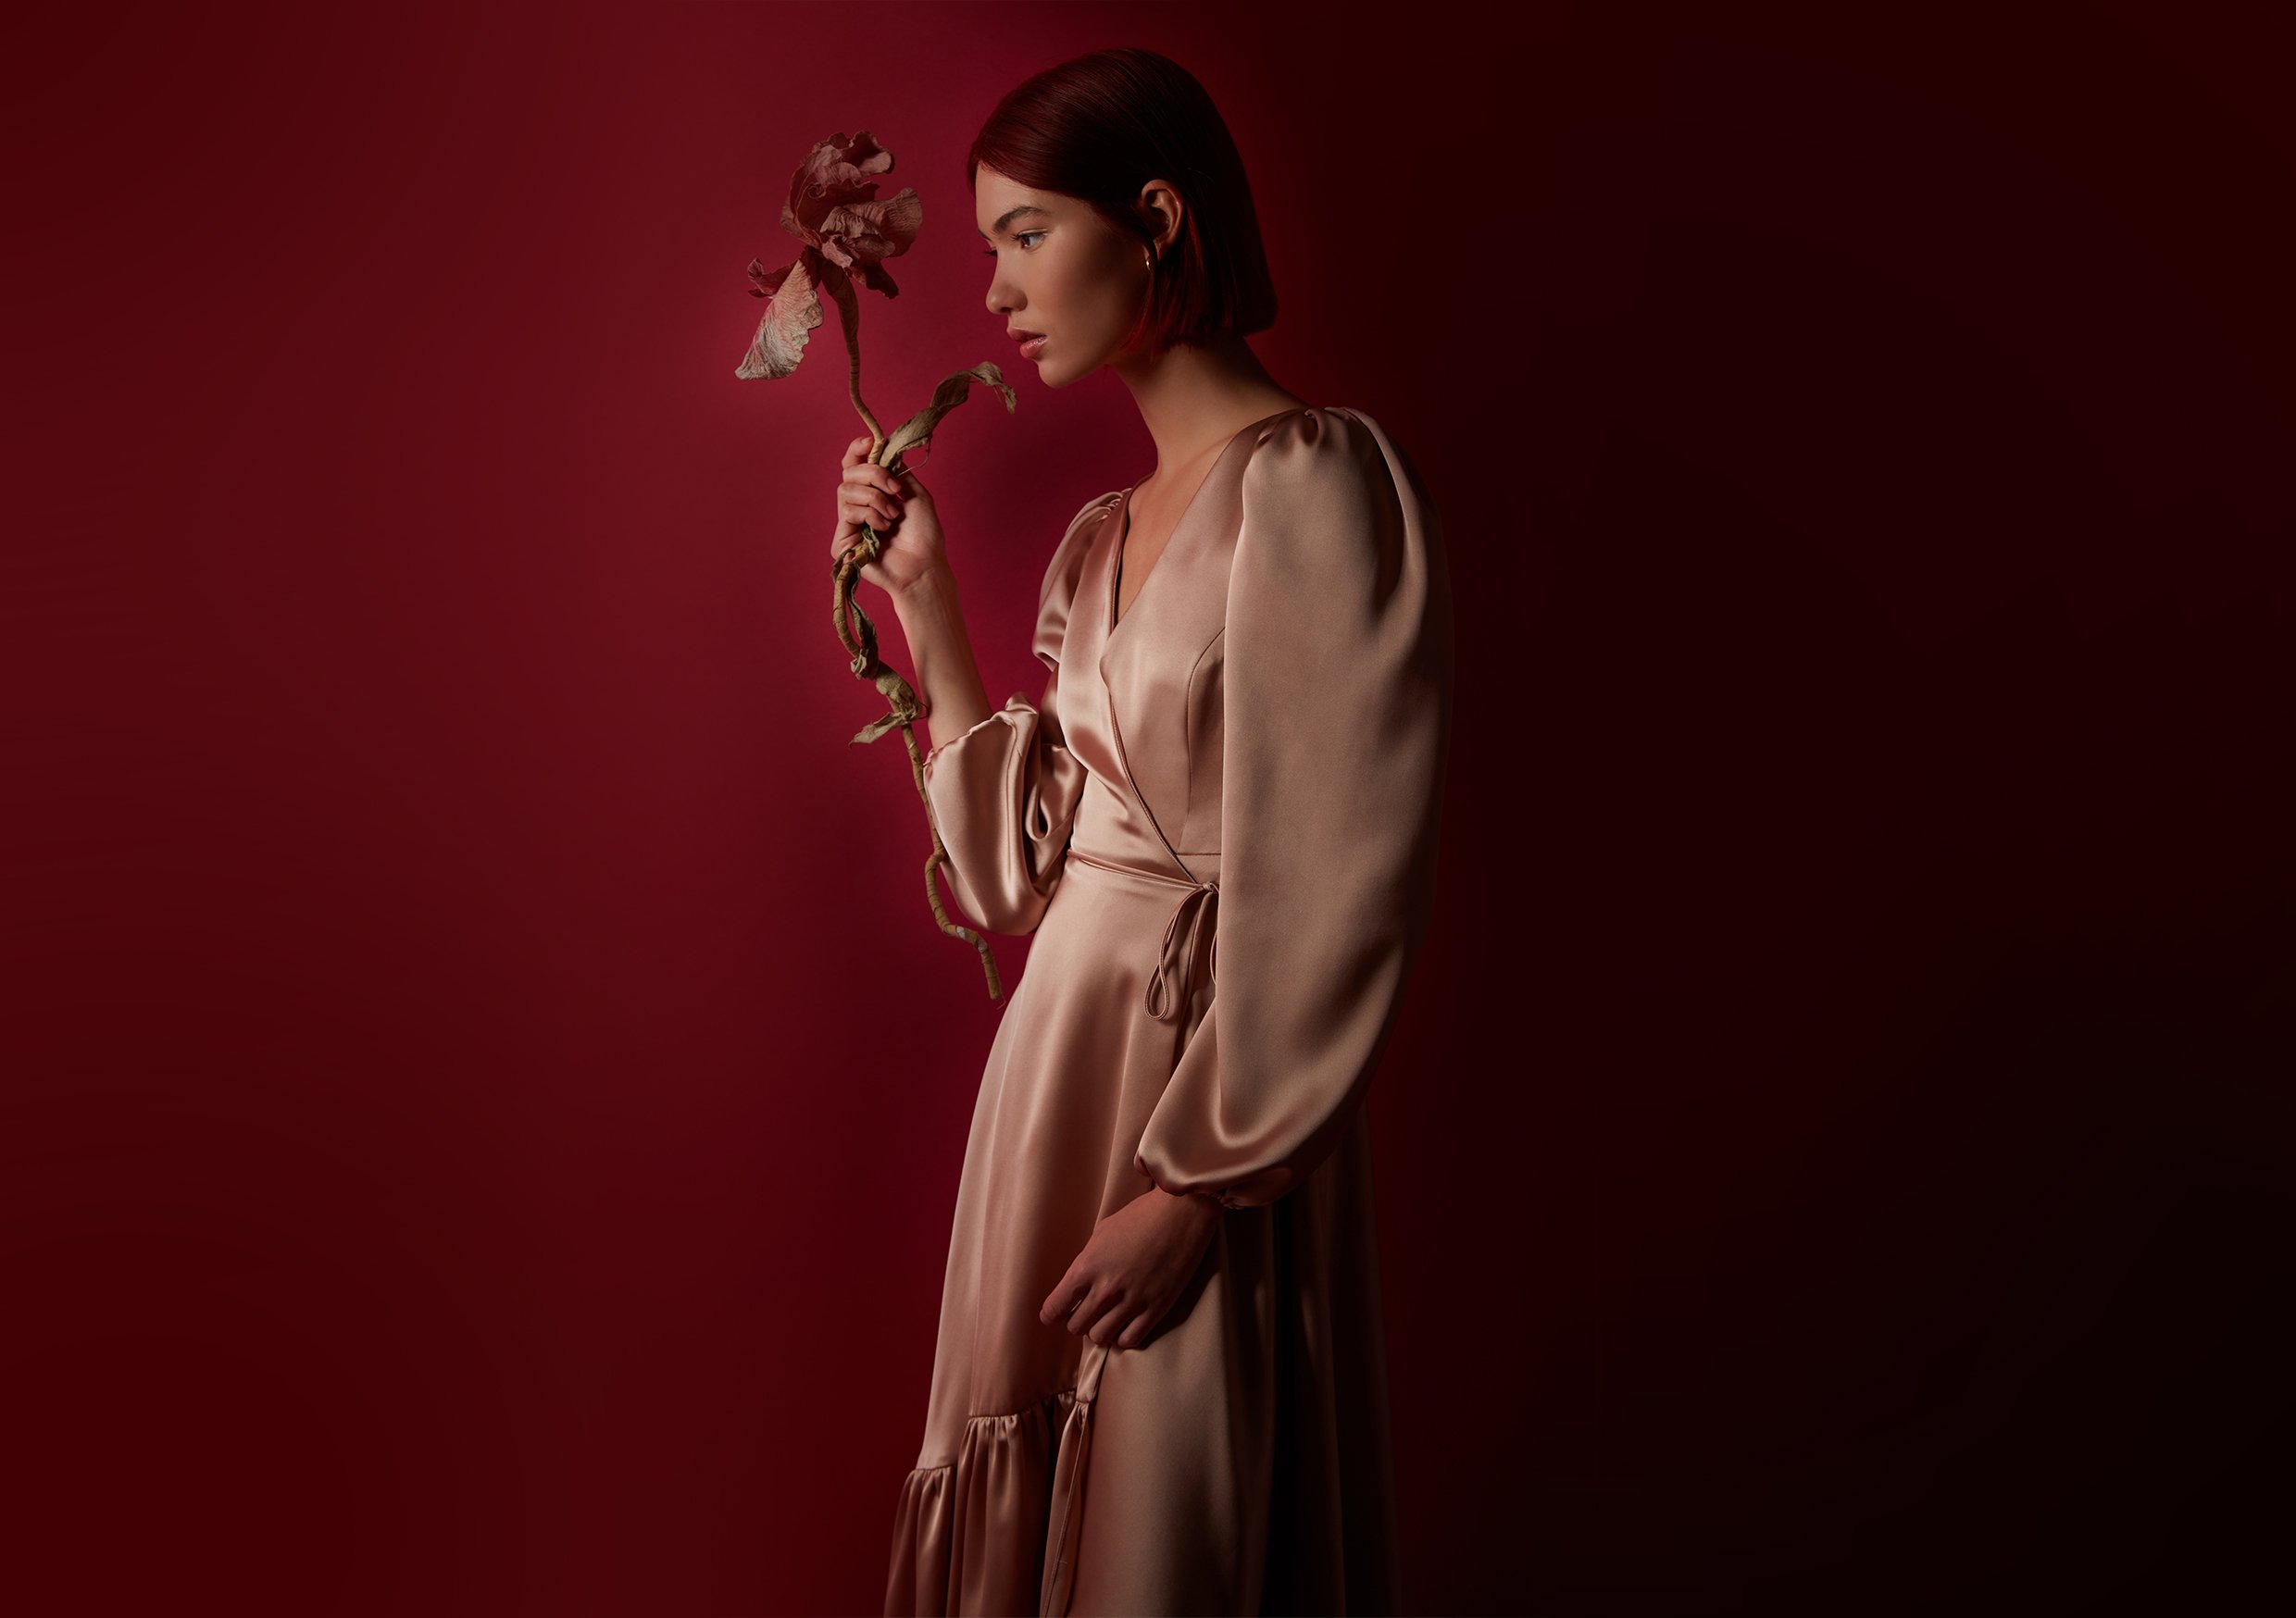 The new Sister collection of bridesmaids dresses and occasion wear by Halfpenny London